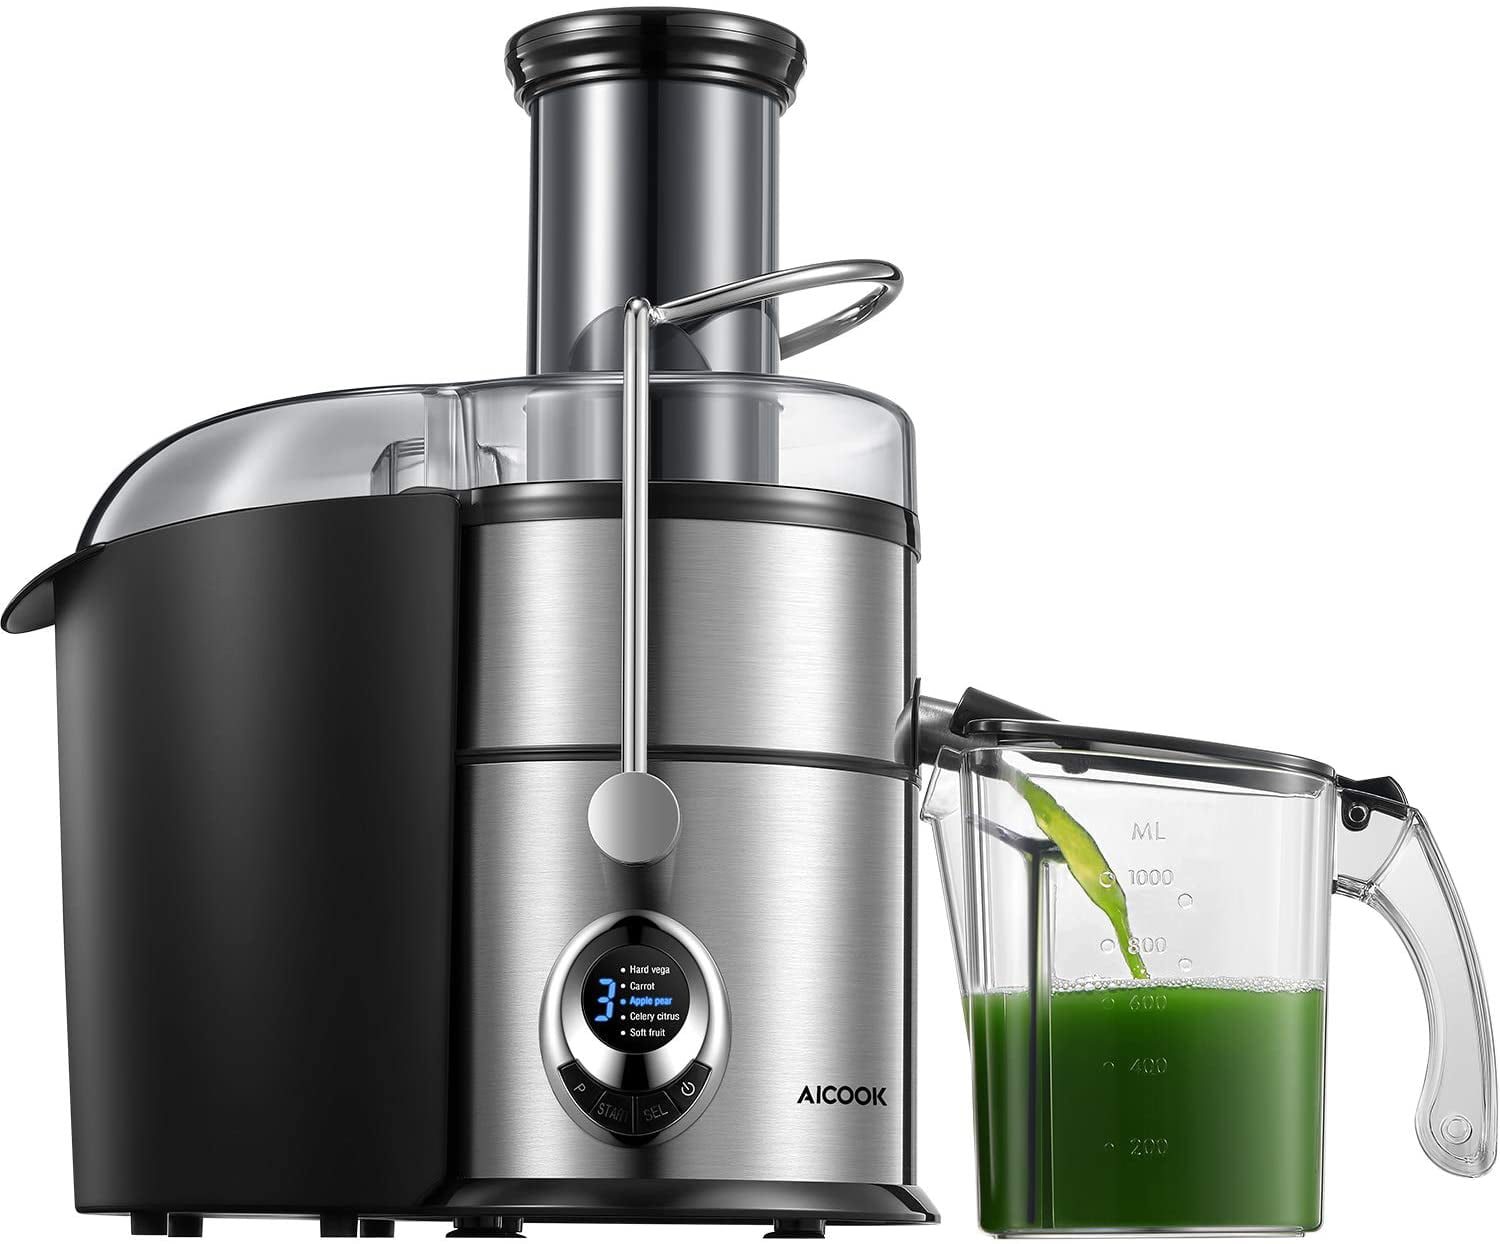 BPA-Free Non-Slip Feet Quiet Motor 3.1 Big Mouth Centrifugal Juicer Juicer Machines Easy to Clean Aicook 800W Juice and Vegetable Extractor 5-Speed Touch Screen 